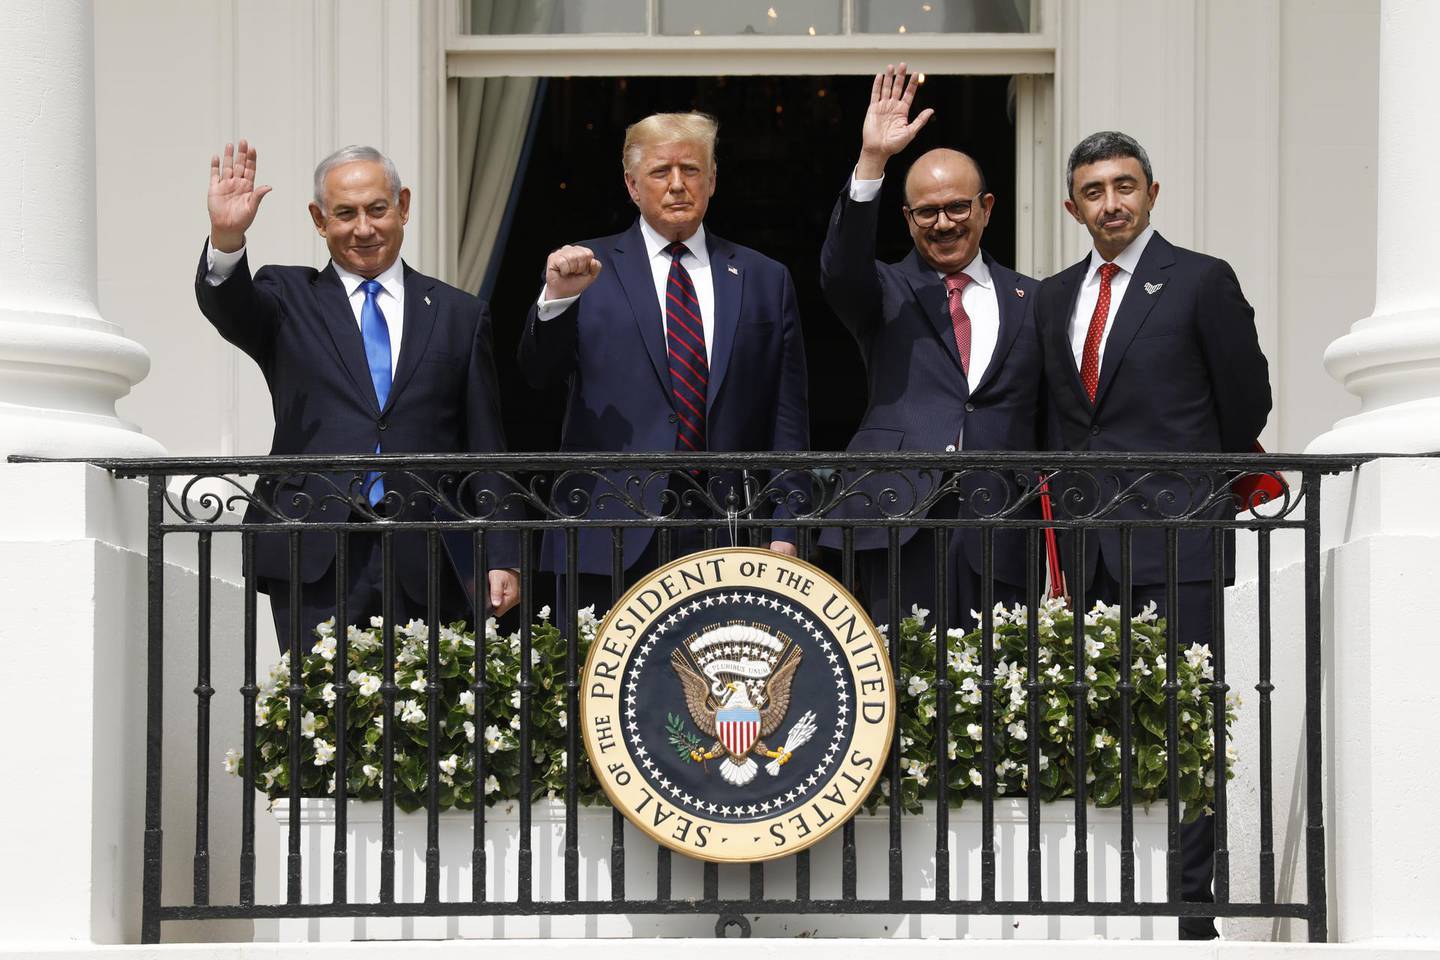 Benjamin Netanyahu, Israel's prime minister, from left, U.S. President Donald Trump, Abdullatif bin Rashid Al Zayani, Bahrain's foreign affairs minister, and Sheikh Abdullah bin Zayed bin Sultan Al Nahyan, United Arab Emirates' foreign affairs minister, stand during an Abraham Accords signing ceremony event on the South Lawn of the White House in Washington, D.C., U.S., on Tuesday, Sept. 15, 2020. The United Arab Emirates and Bahrain signed landmark agreements on Tuesday to move toward establishing normal relations with Israel, setting in motion a potentially historic shift in Mideast politics at a White House ceremony hosted by President Donald Trump. Photographer: Yuri Gripas/Abaca/Bloomberg